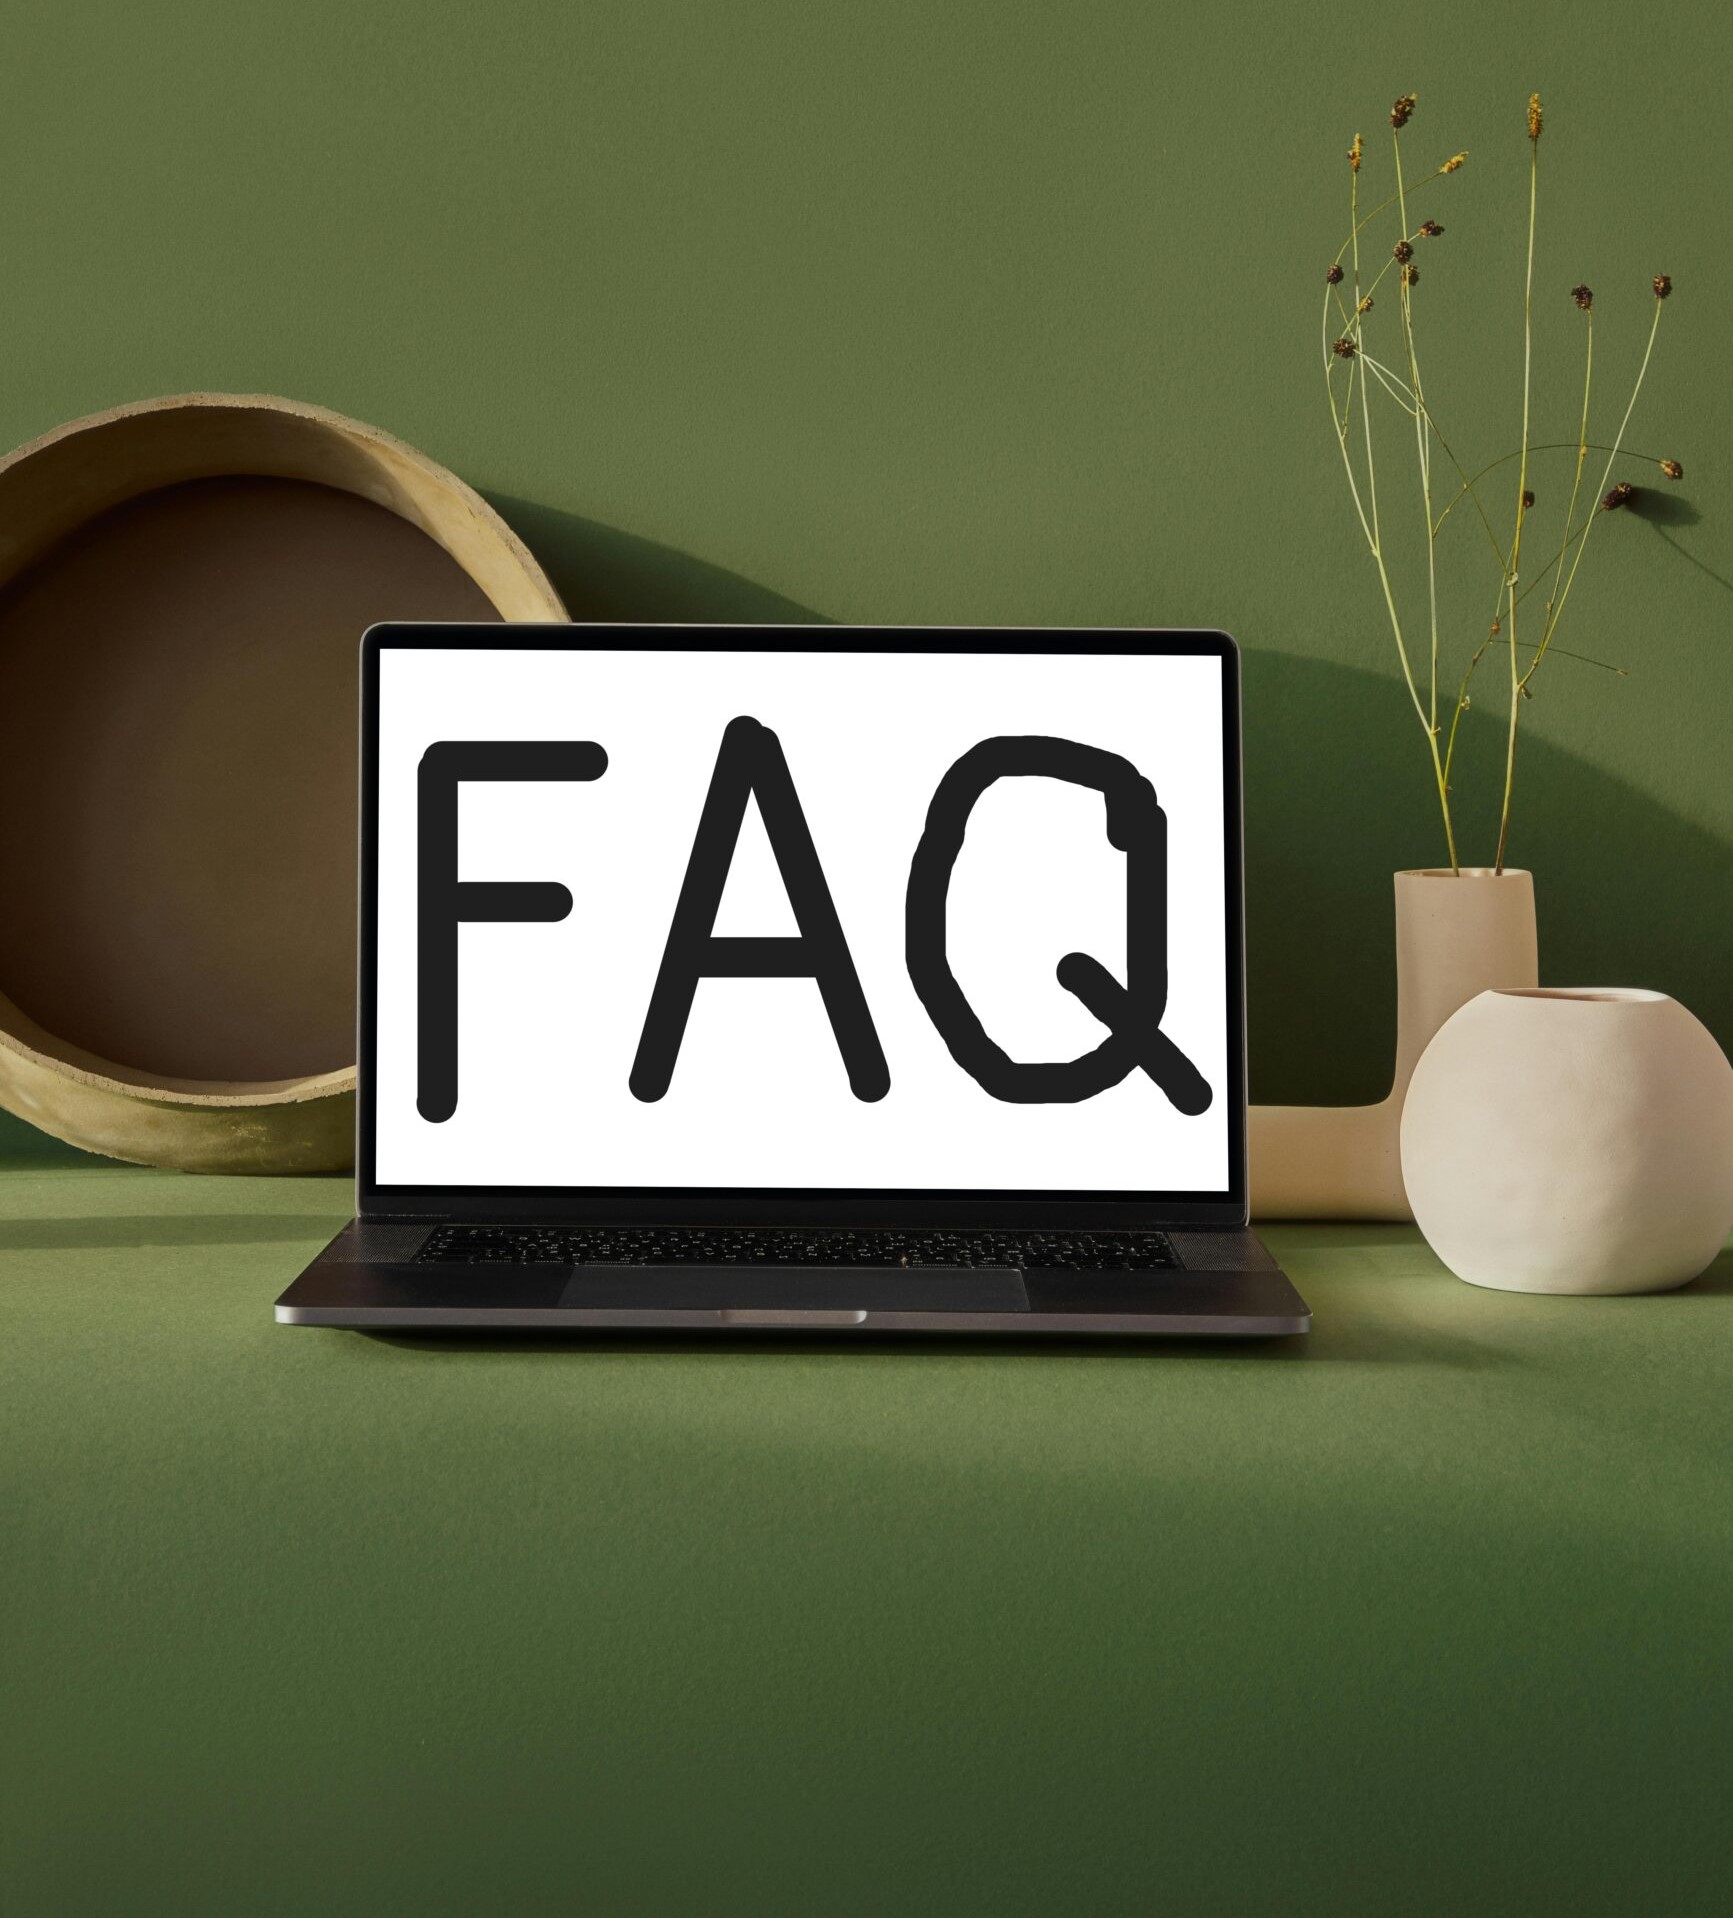 computer screen displaying the letters FAQ, which is short for frequently asked questions.